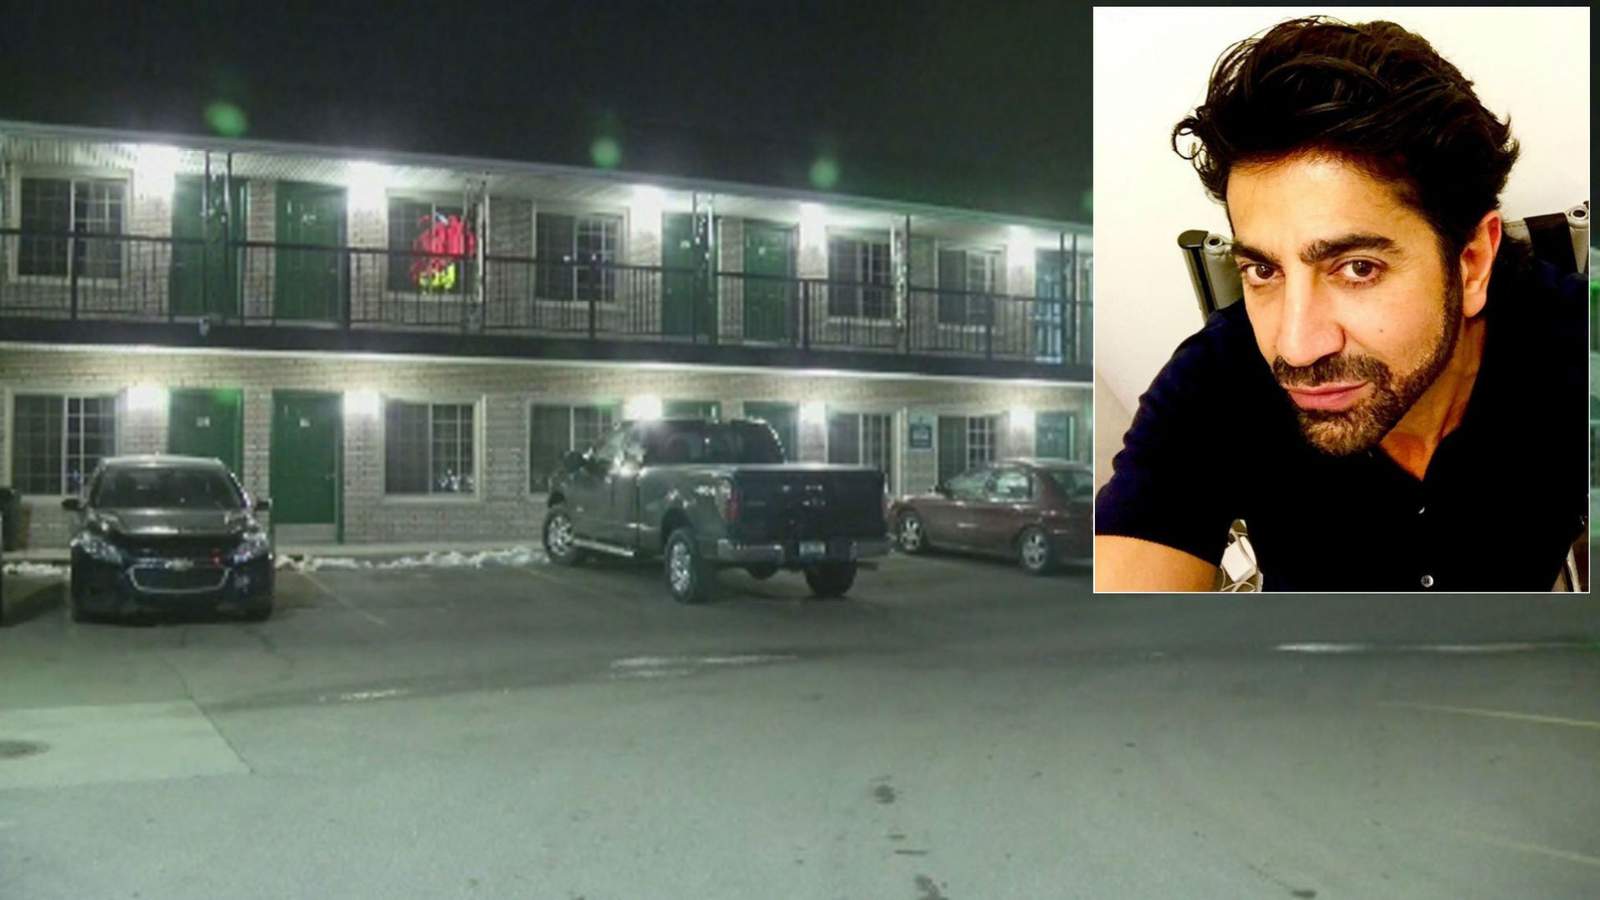 Popular hairstylist from Bloomfield Township killed inside Detroit motel, police say